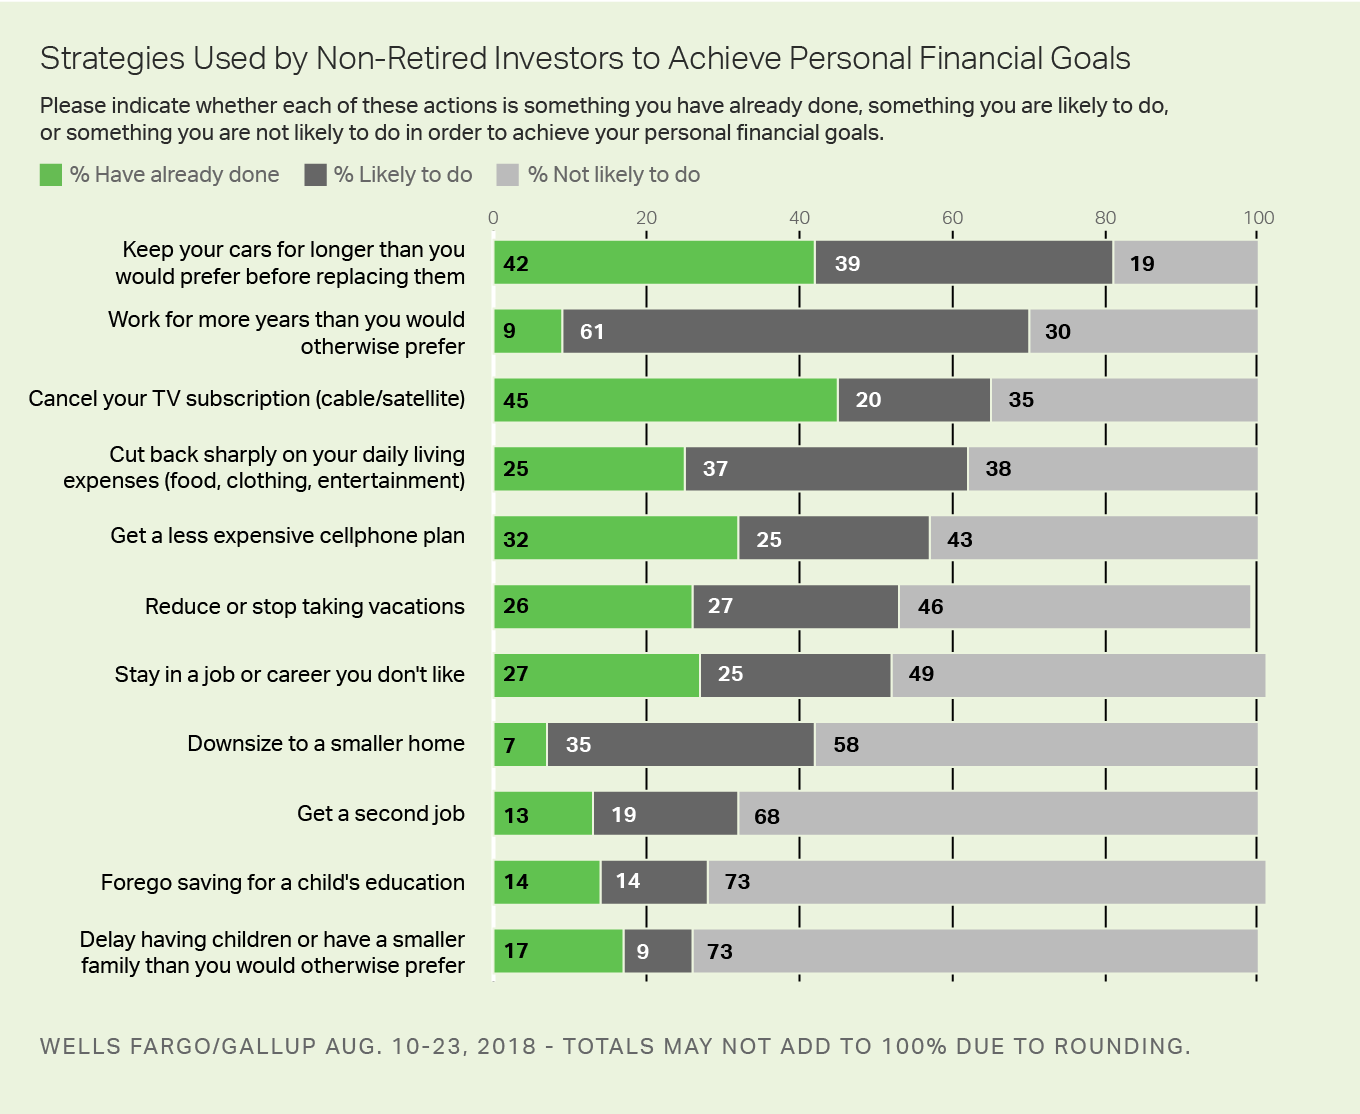 Bar chart showing 11 different actions that could help non-retired investors achieve their financial goals.